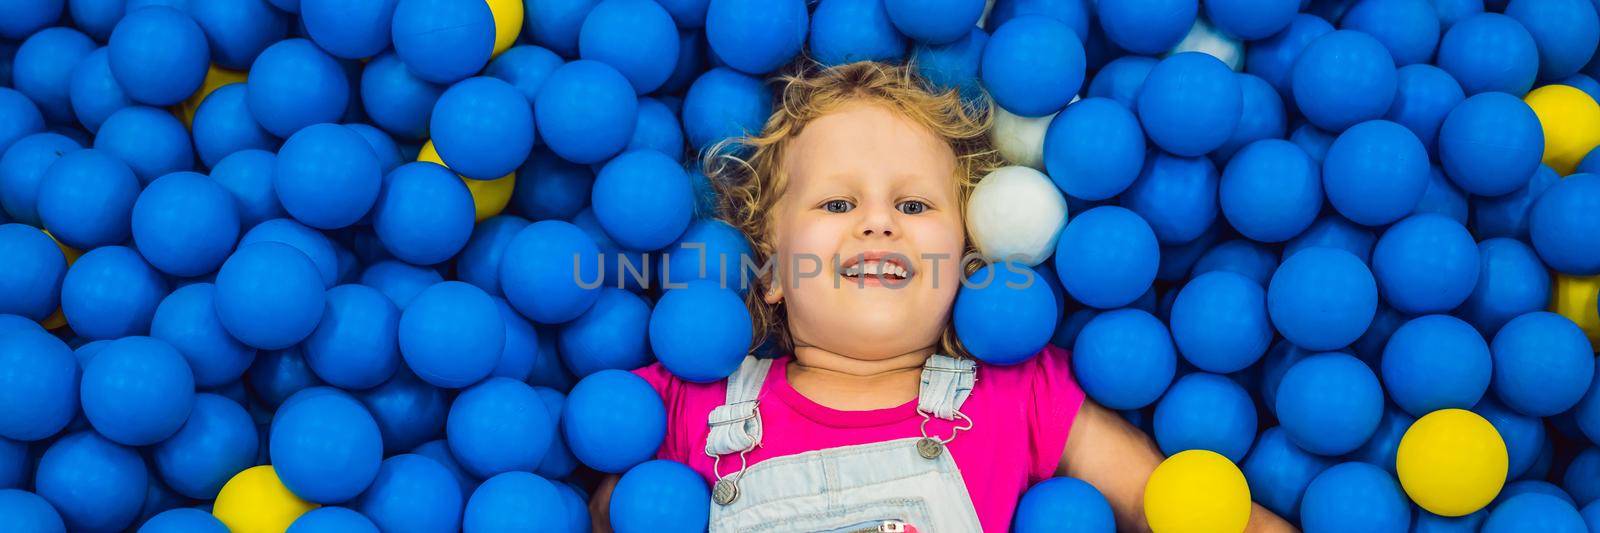 BANNER, LONG FORMAT Child playing in ball pit. Colorful toys for kids. Kindergarten or preschool play room. Toddler kid at day care indoor playground. Balls pool for children. Birthday party for active preschooler by galitskaya